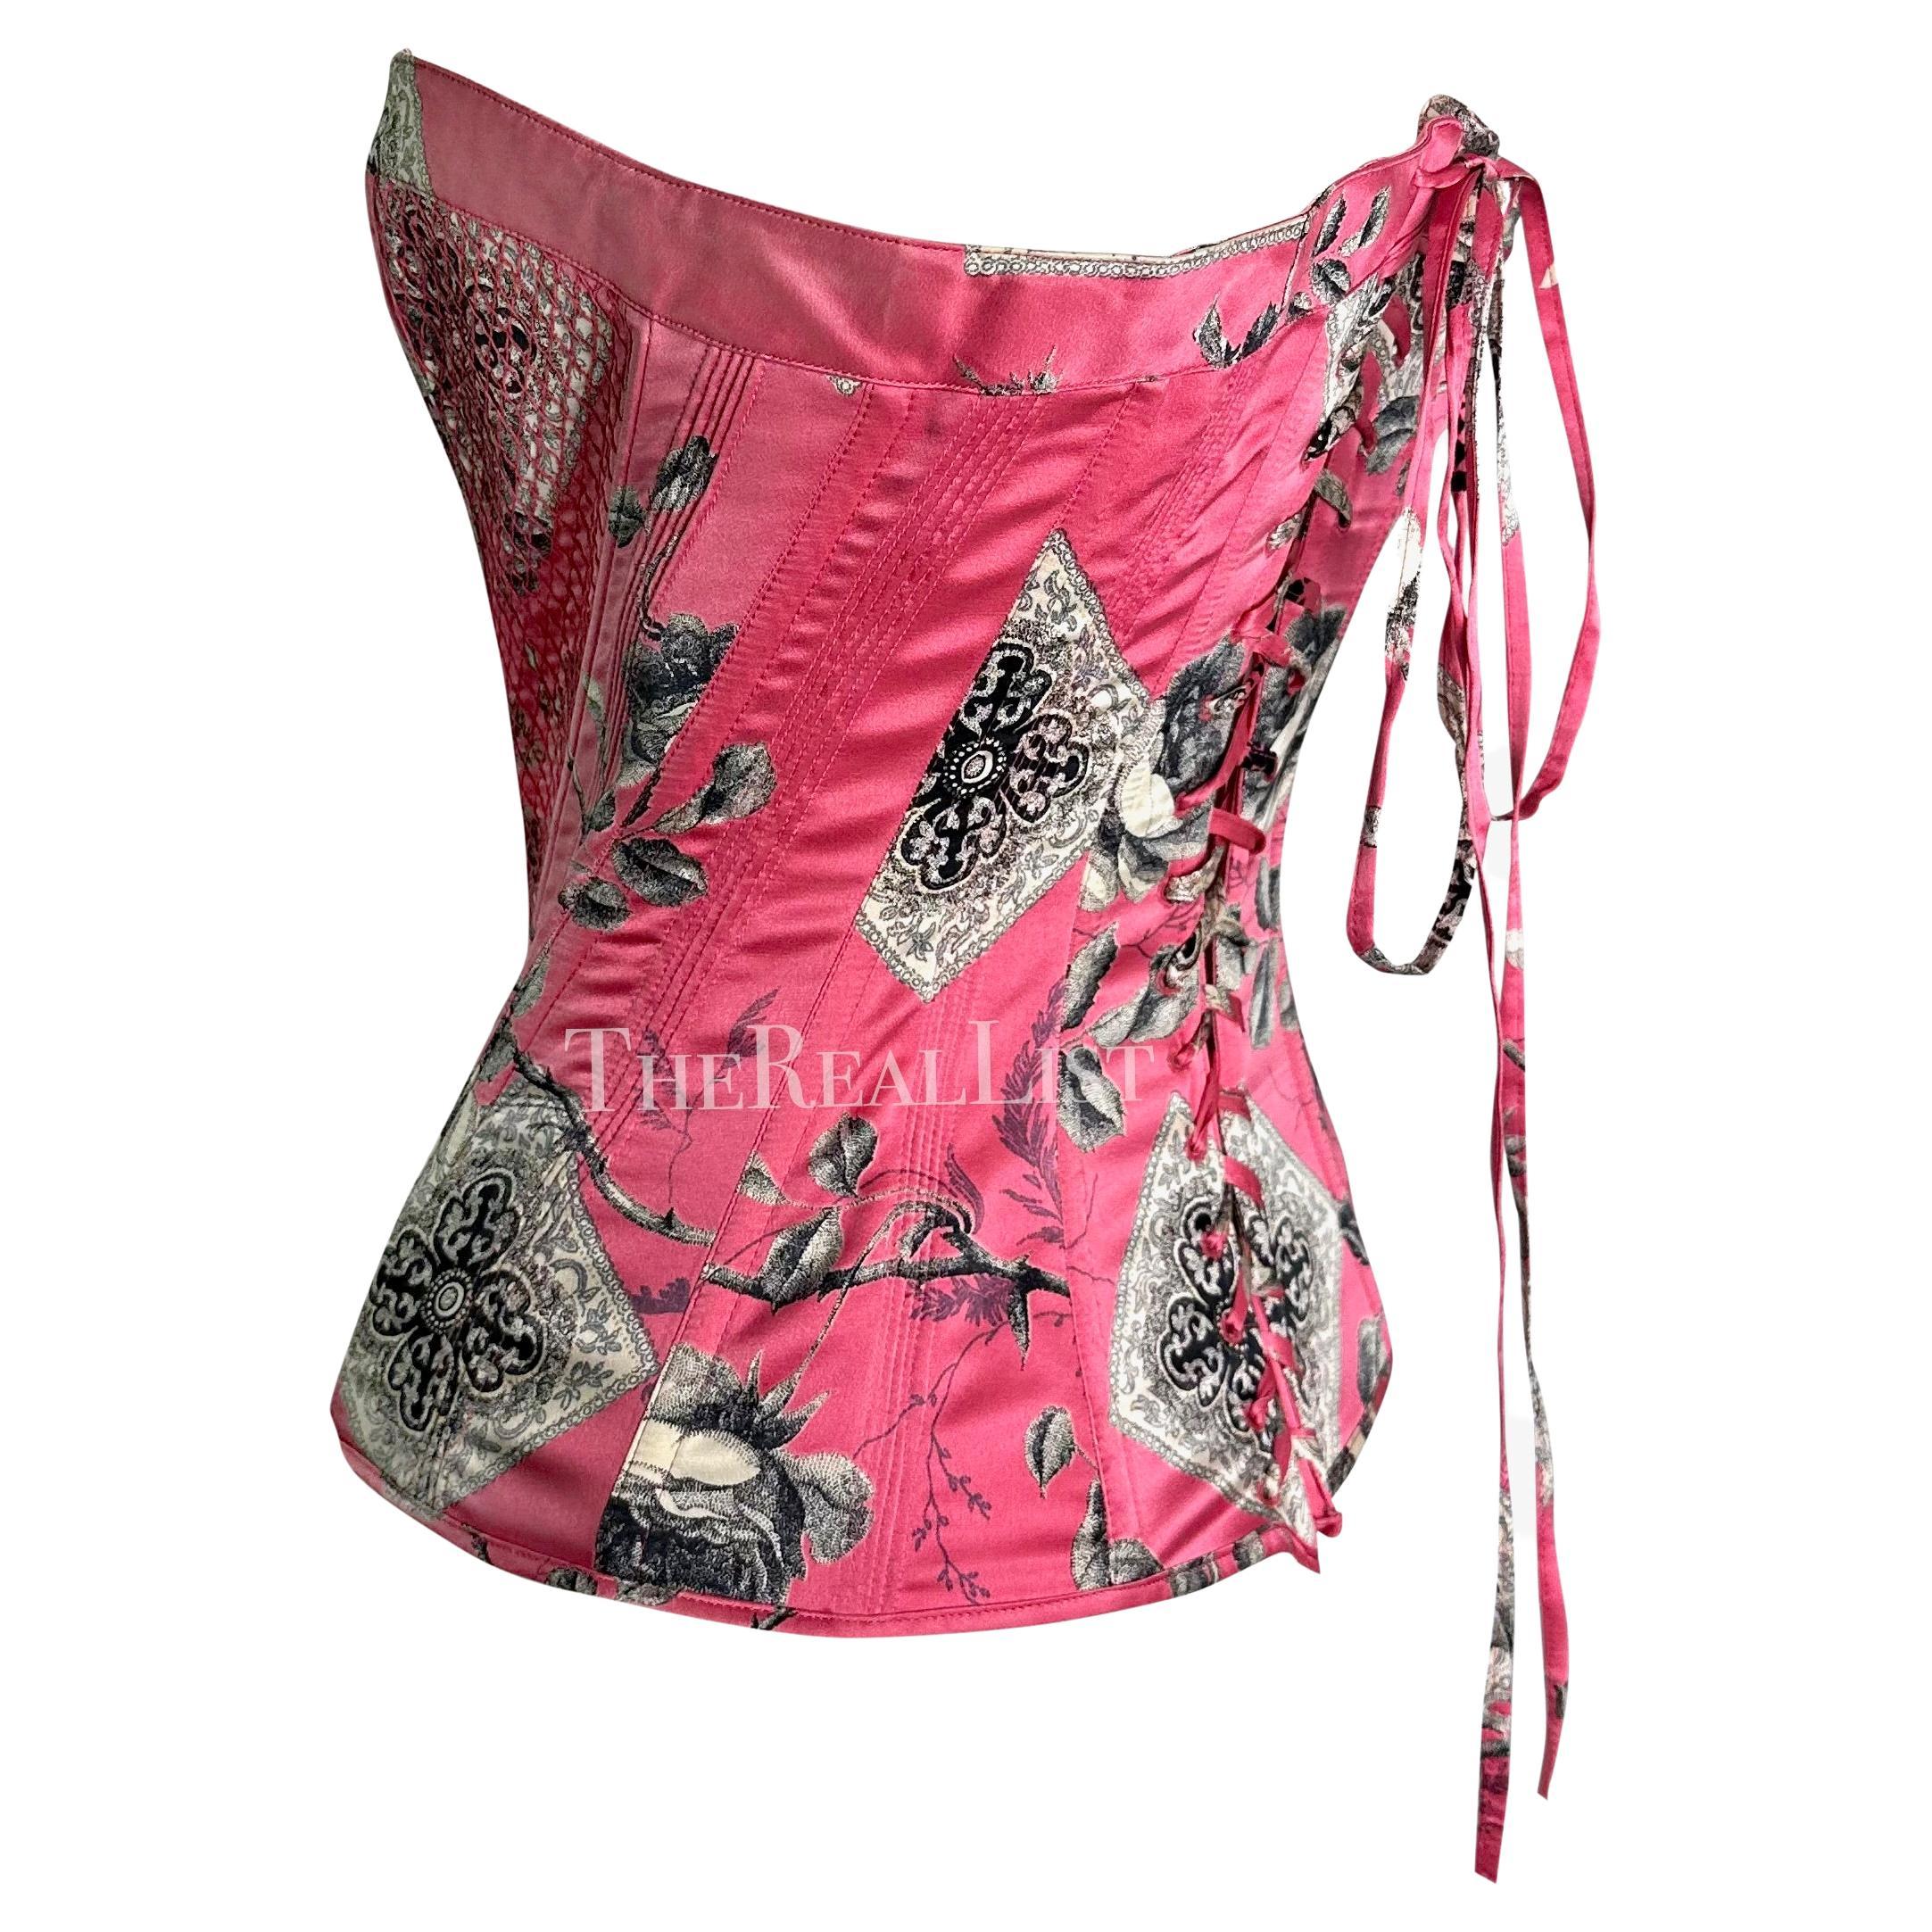 2004 Roberto Cavalli Pink Floral Quilted Silk Lace-Up Corset Bustier Top In Good Condition For Sale In West Hollywood, CA